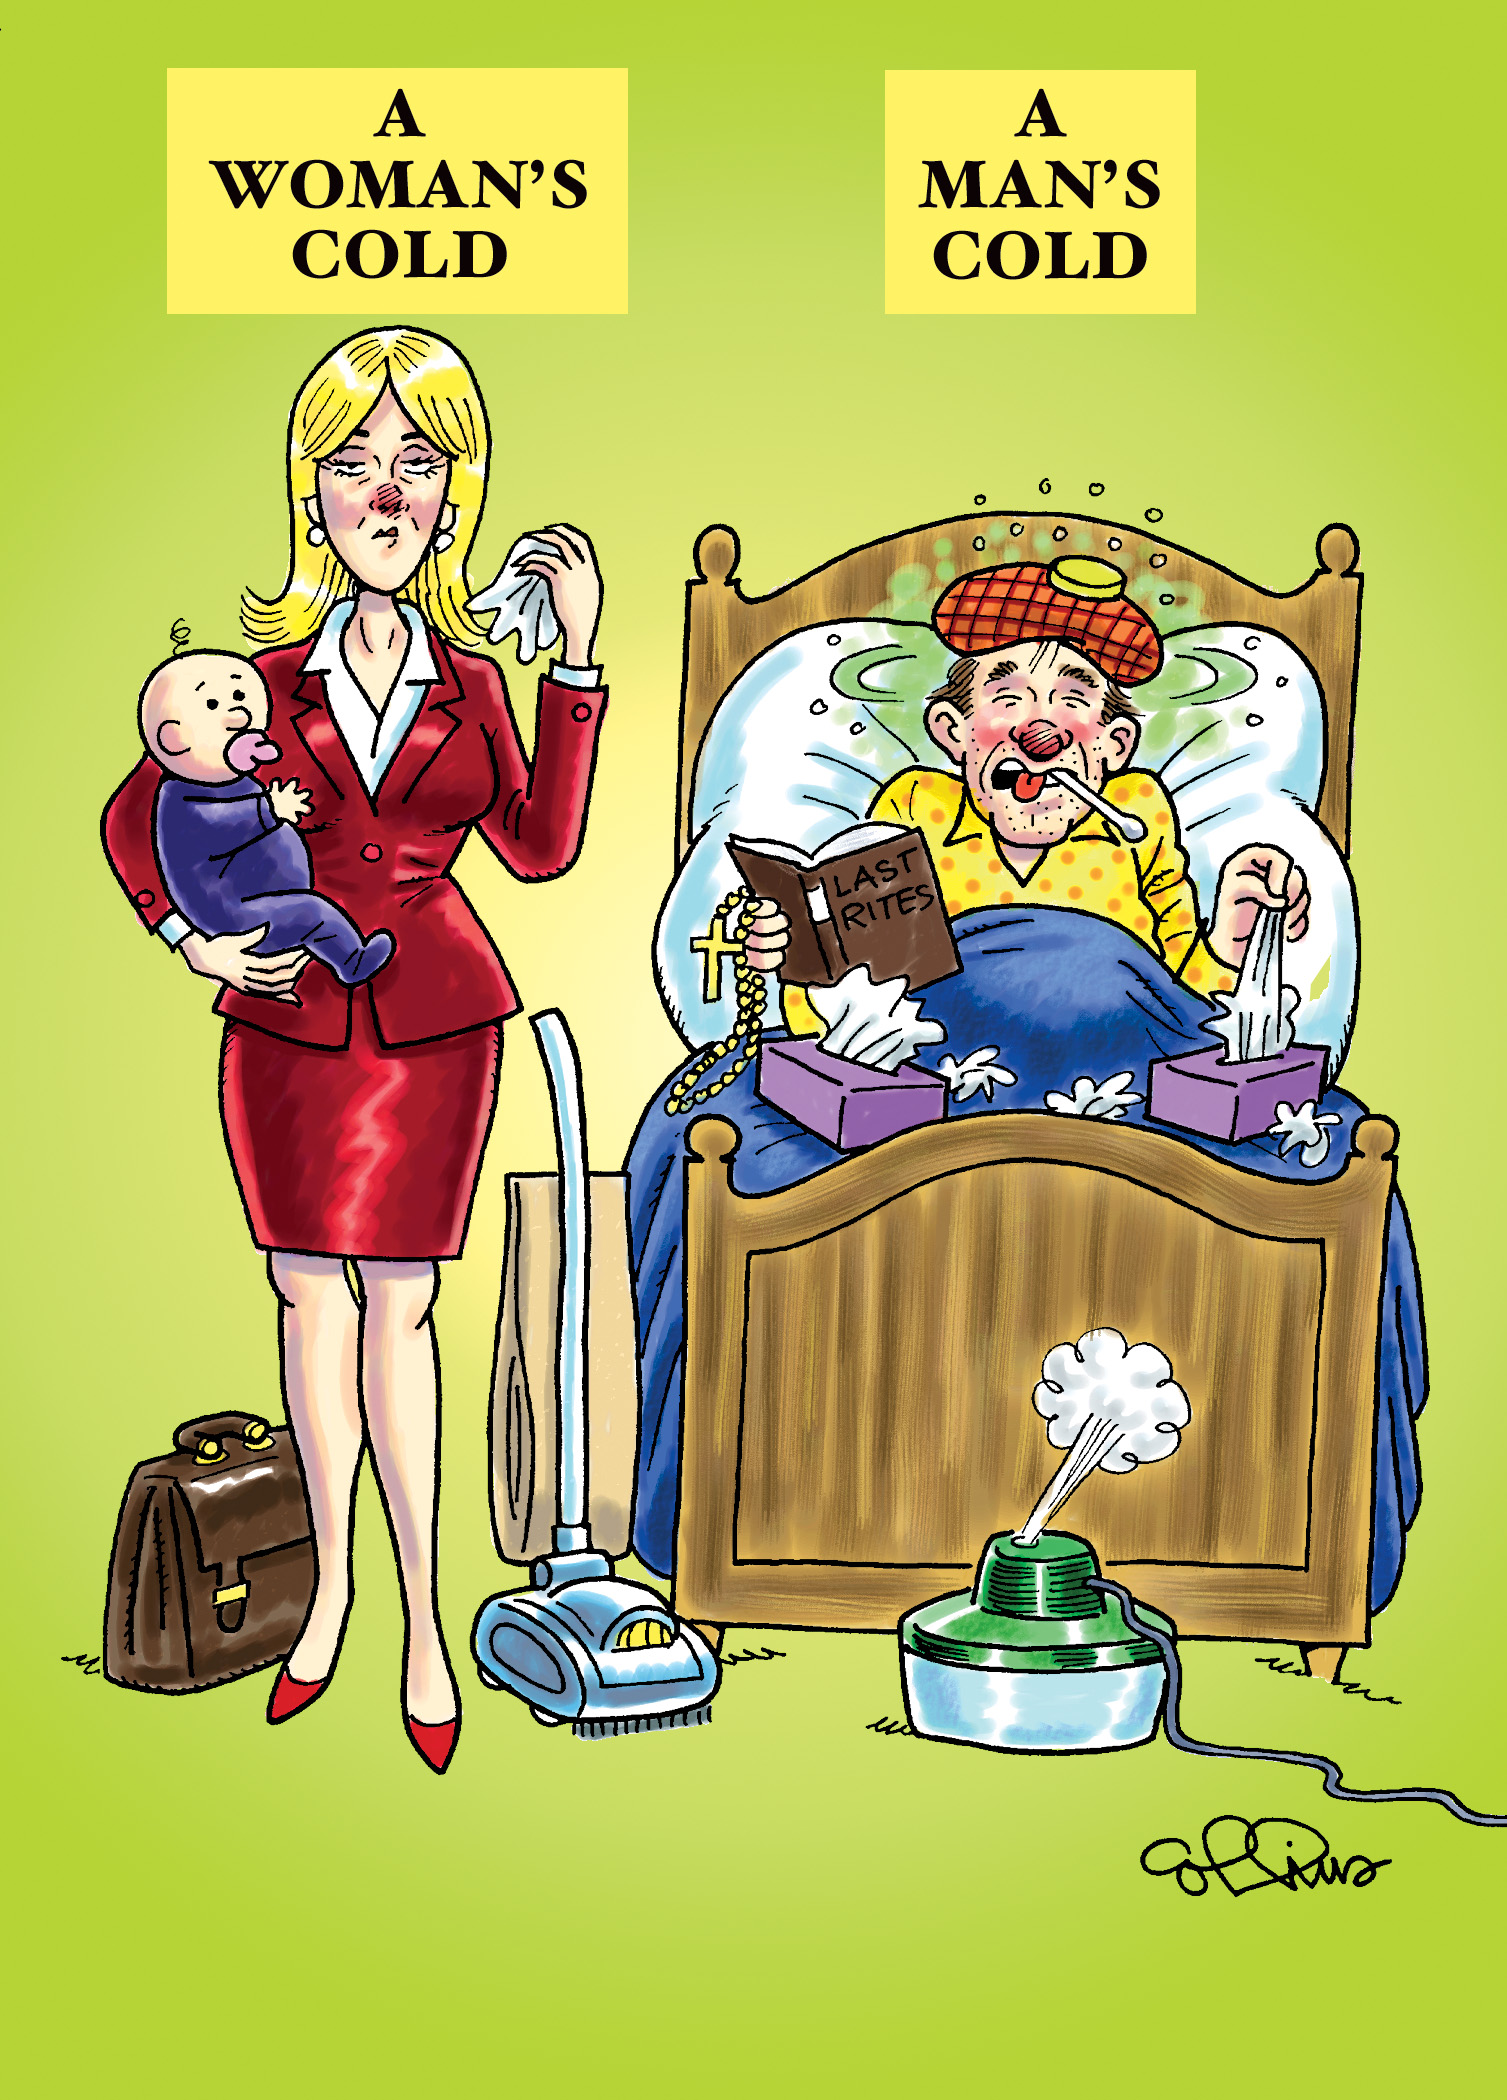 Blog about woman cold: cartoon of woman with a cold who is holding baby dressed for work beside a man with a cold who is tenderly nursing it in bed